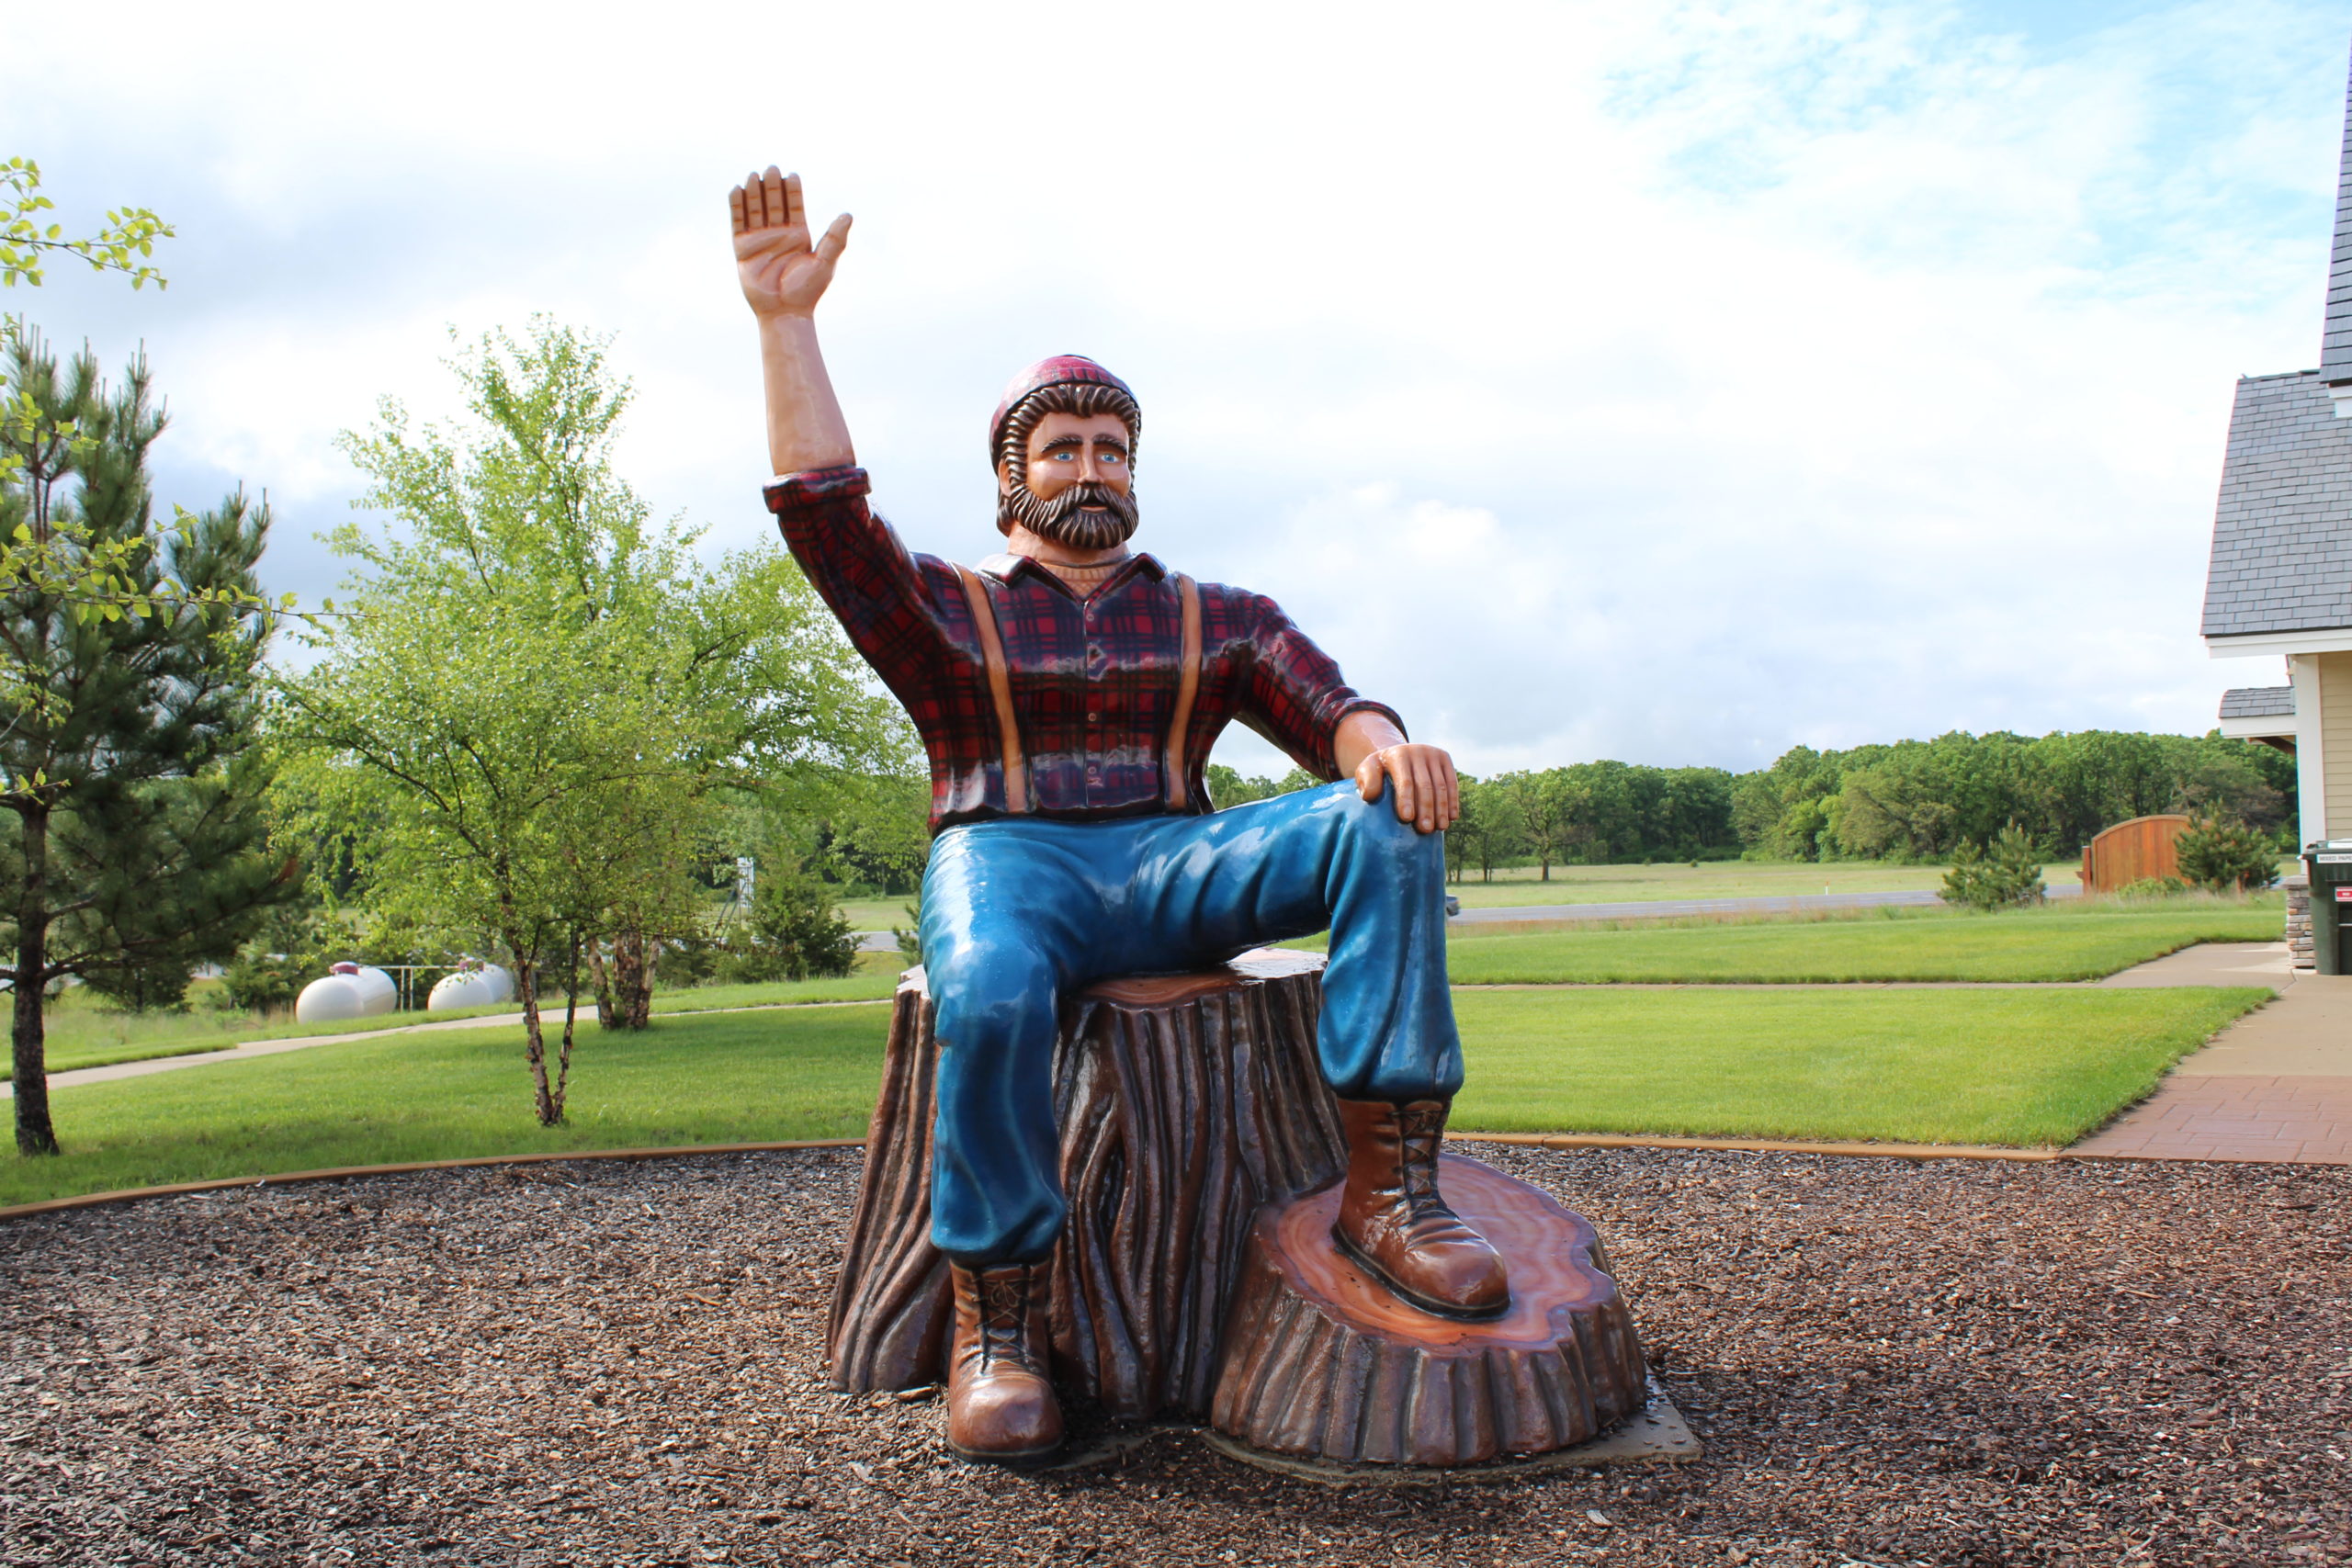 A Large Statue Of Which Folk Hero Stands In Brainerd, Minnesota?